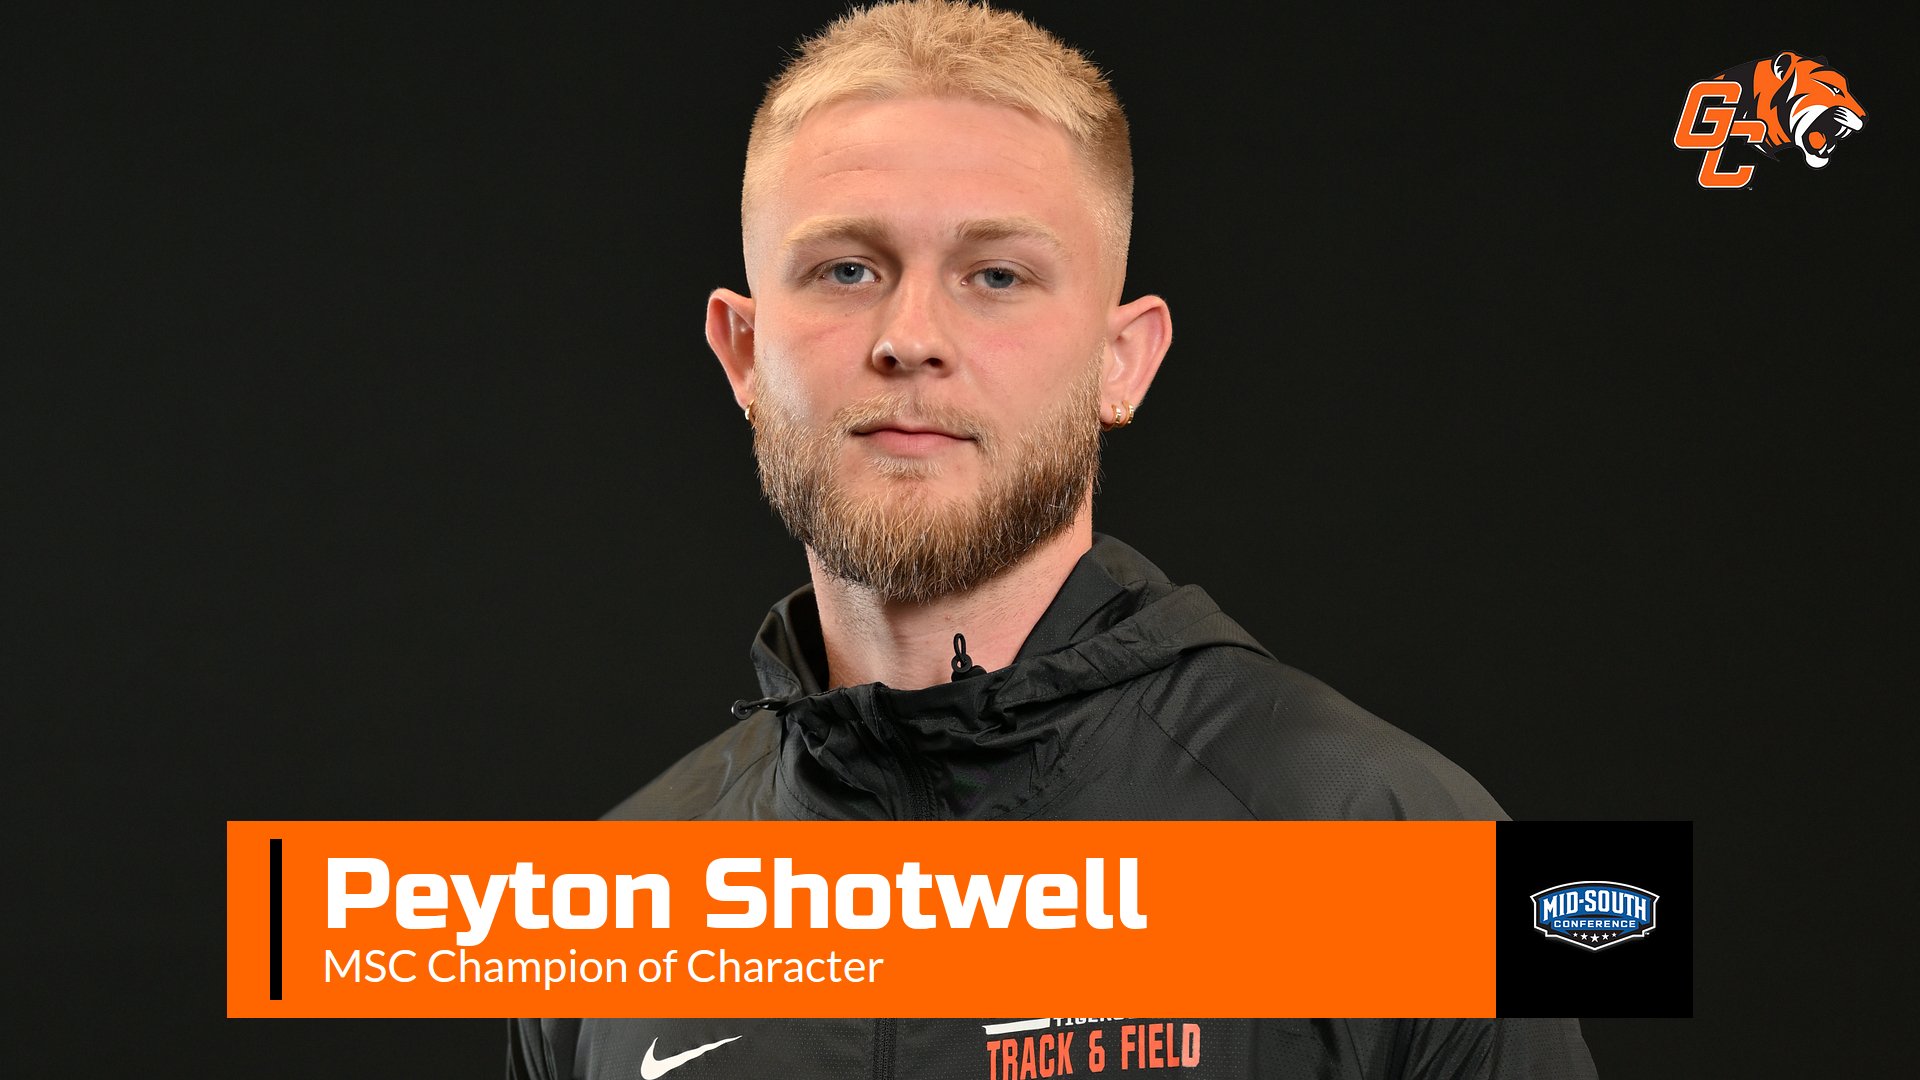 Peyton Shotwell named MSC Champion of Character